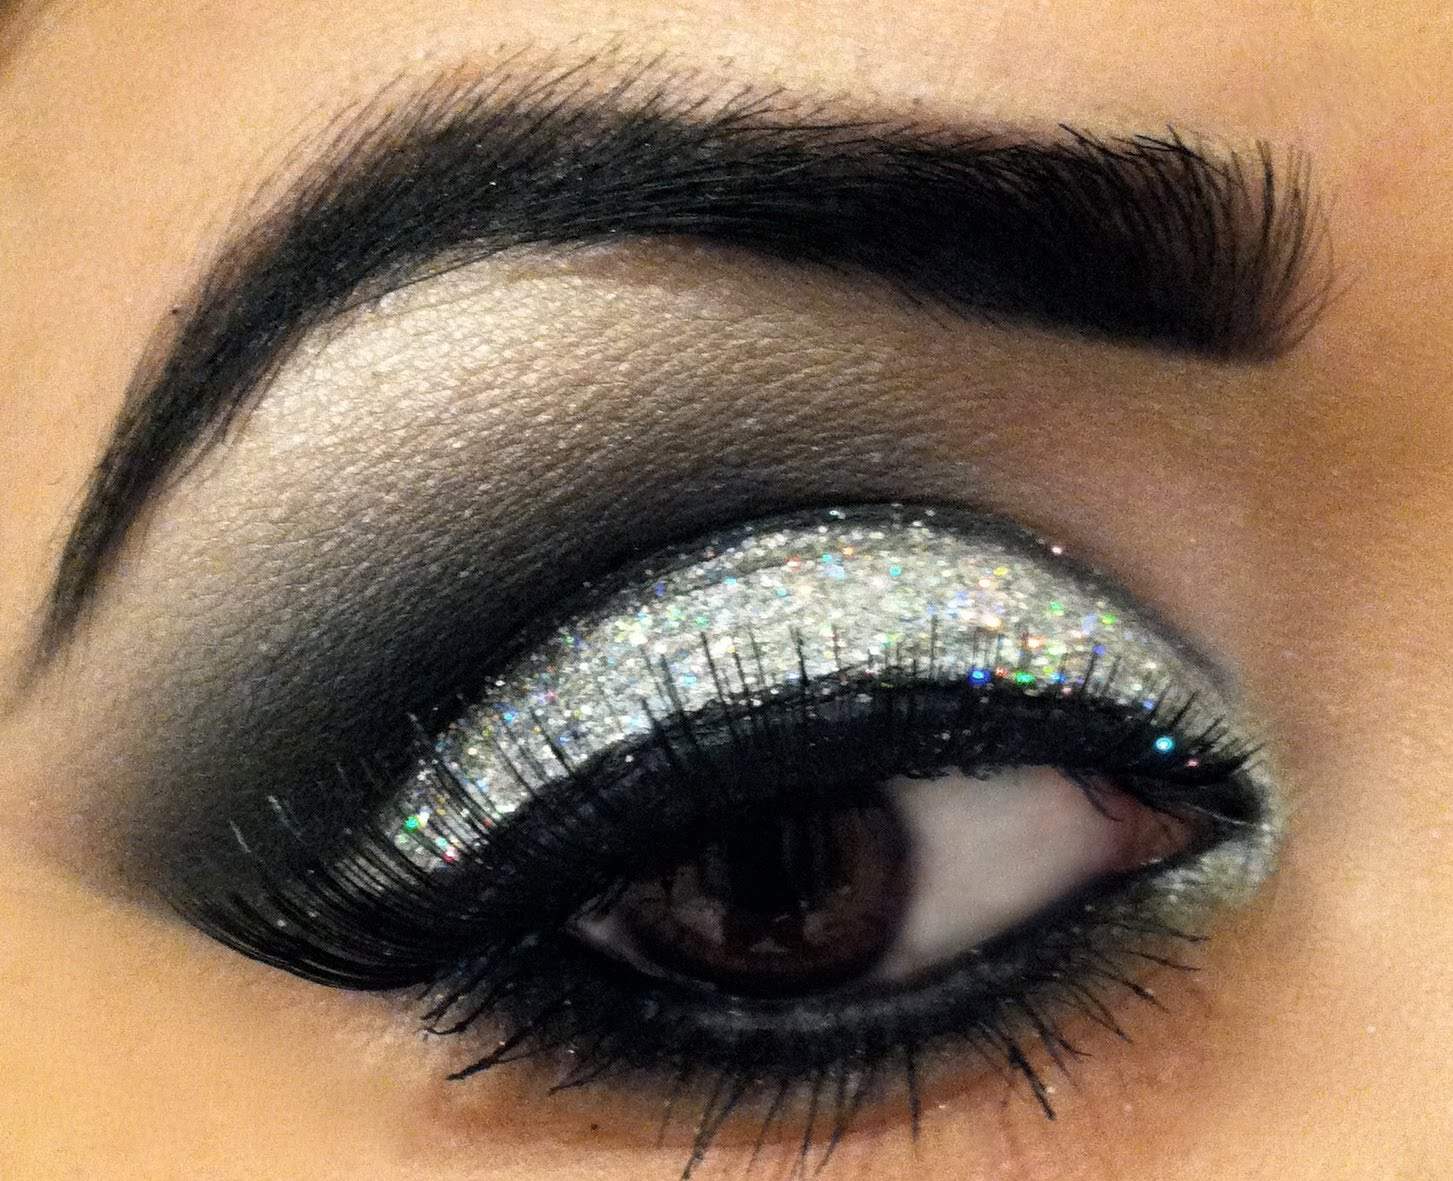 Creative Eye Makeup Looks and Design Ideas - Page 2